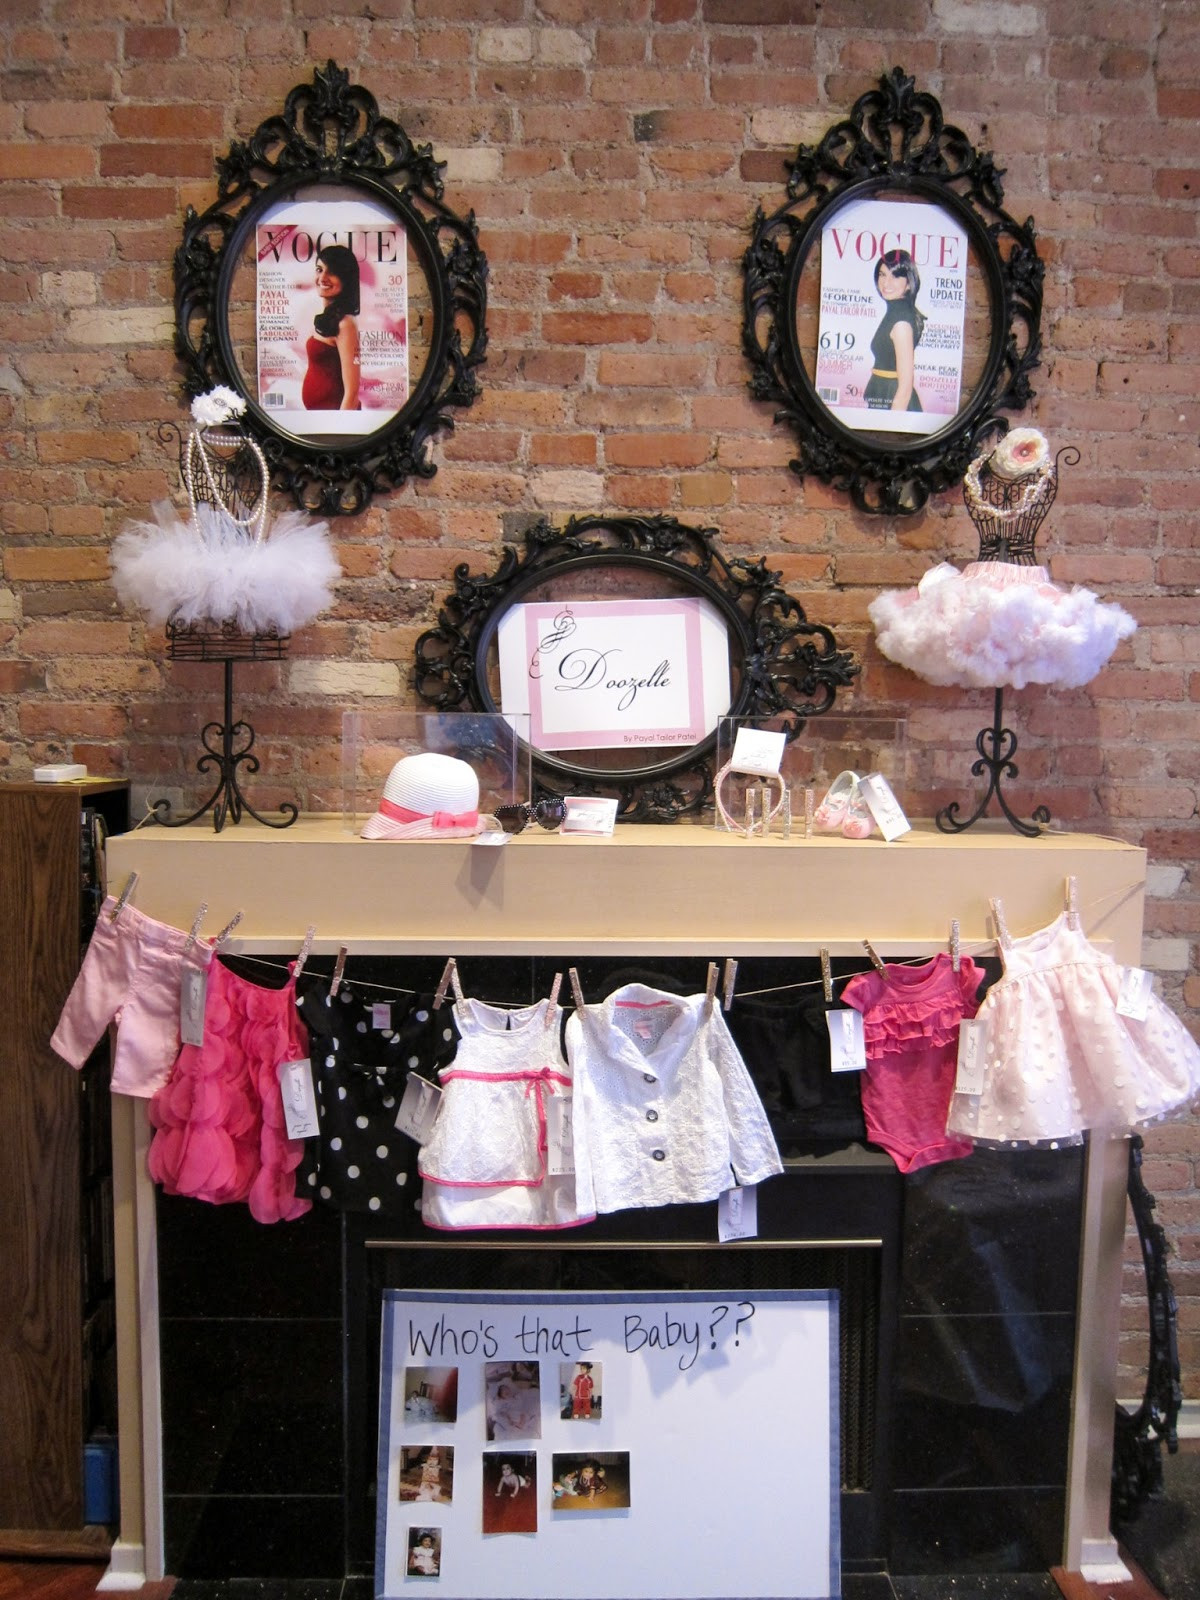 Baby Shower Fashion
 rivernorthLove Fashion Show Themed Baby Shower Part 2